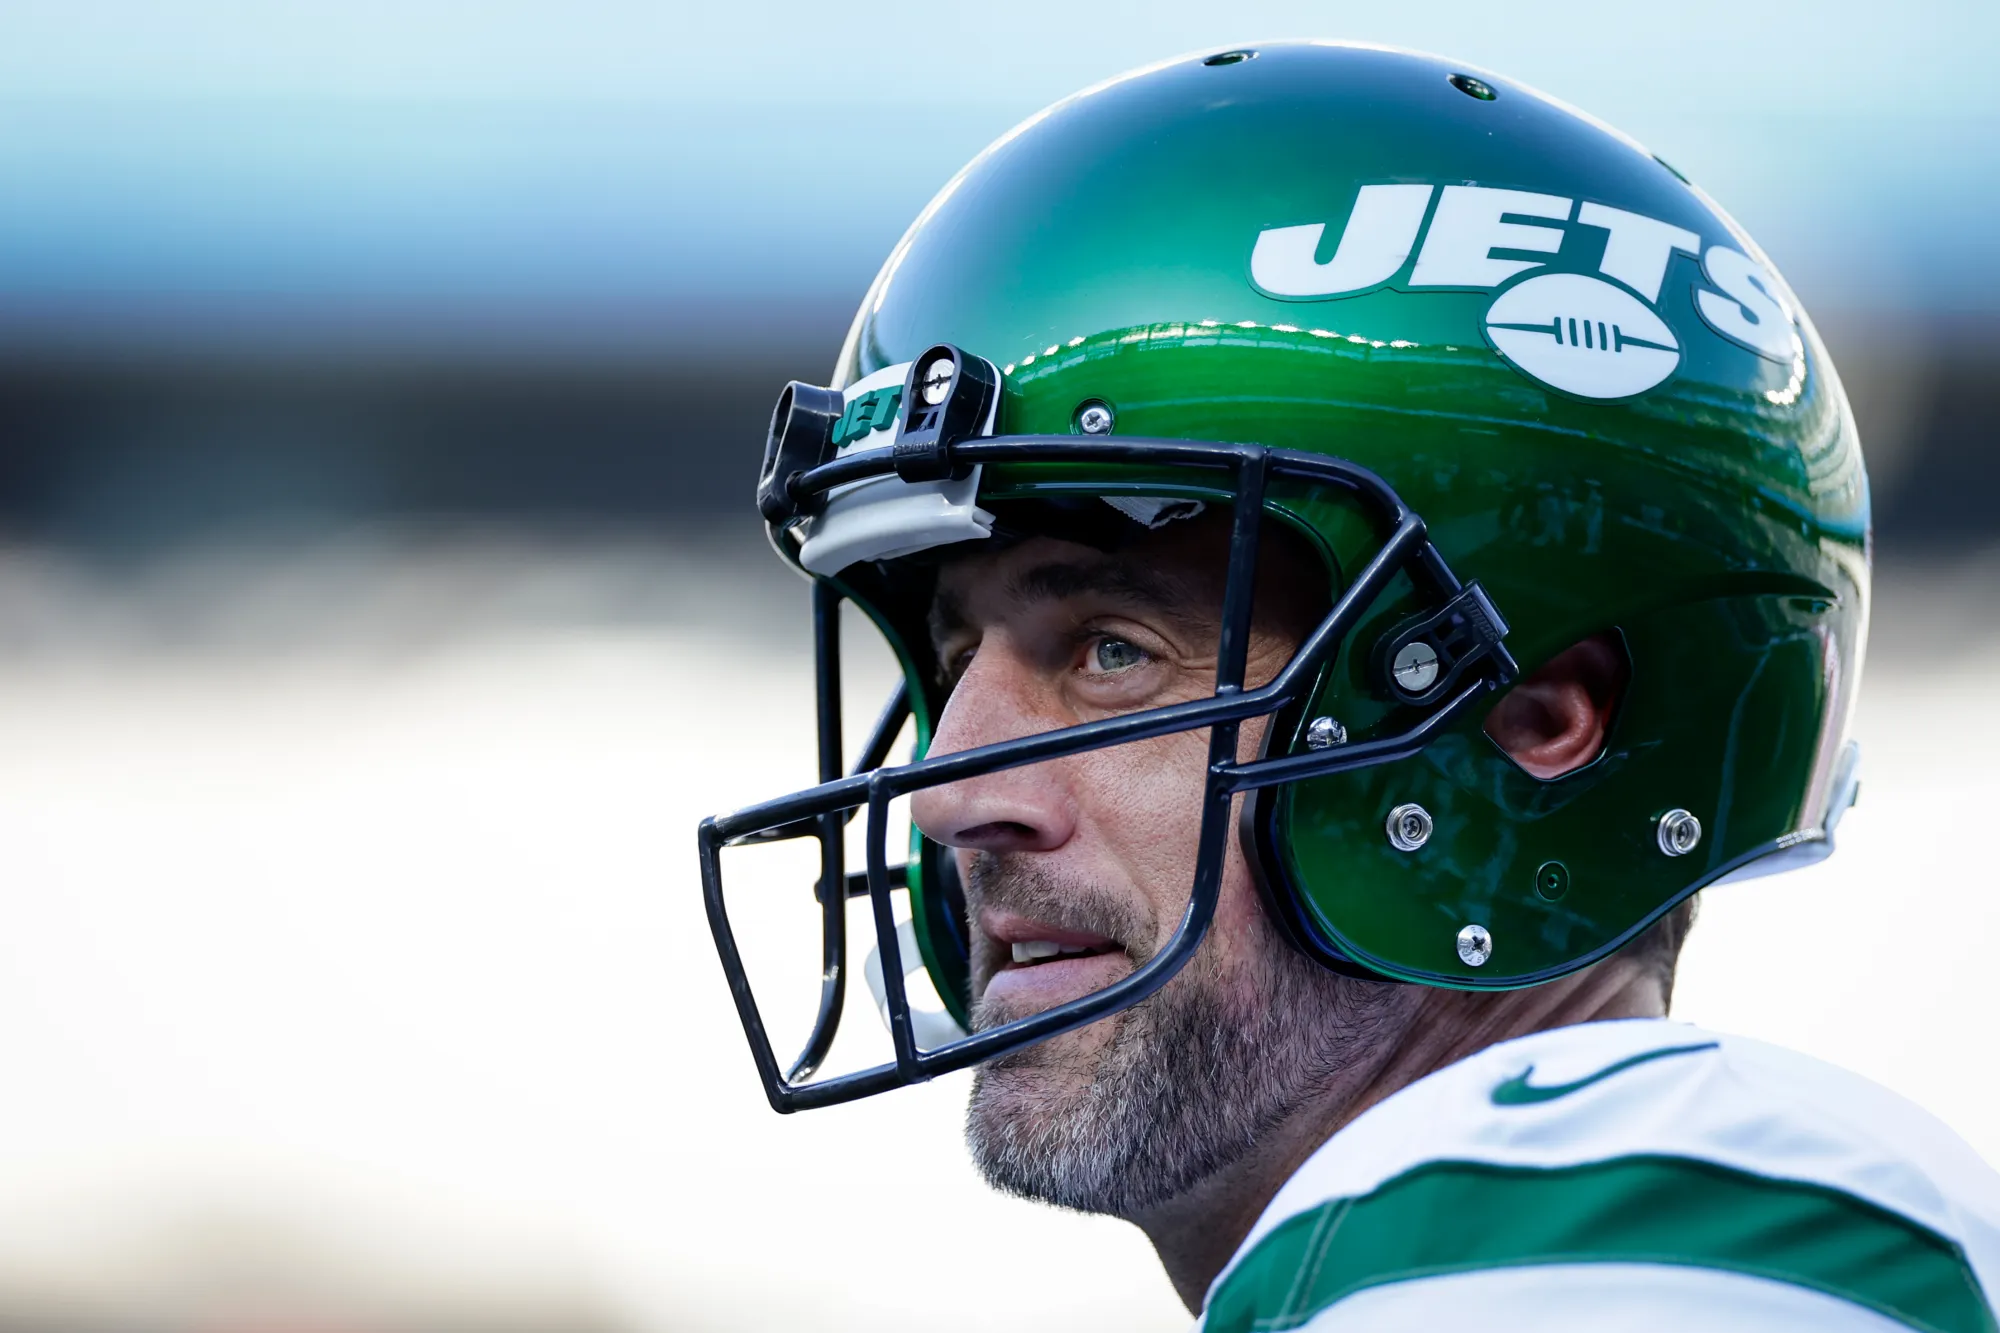  From Gridiron to Government? Aaron Rodgers' Surprising Political Pass and What It Means for the Jets